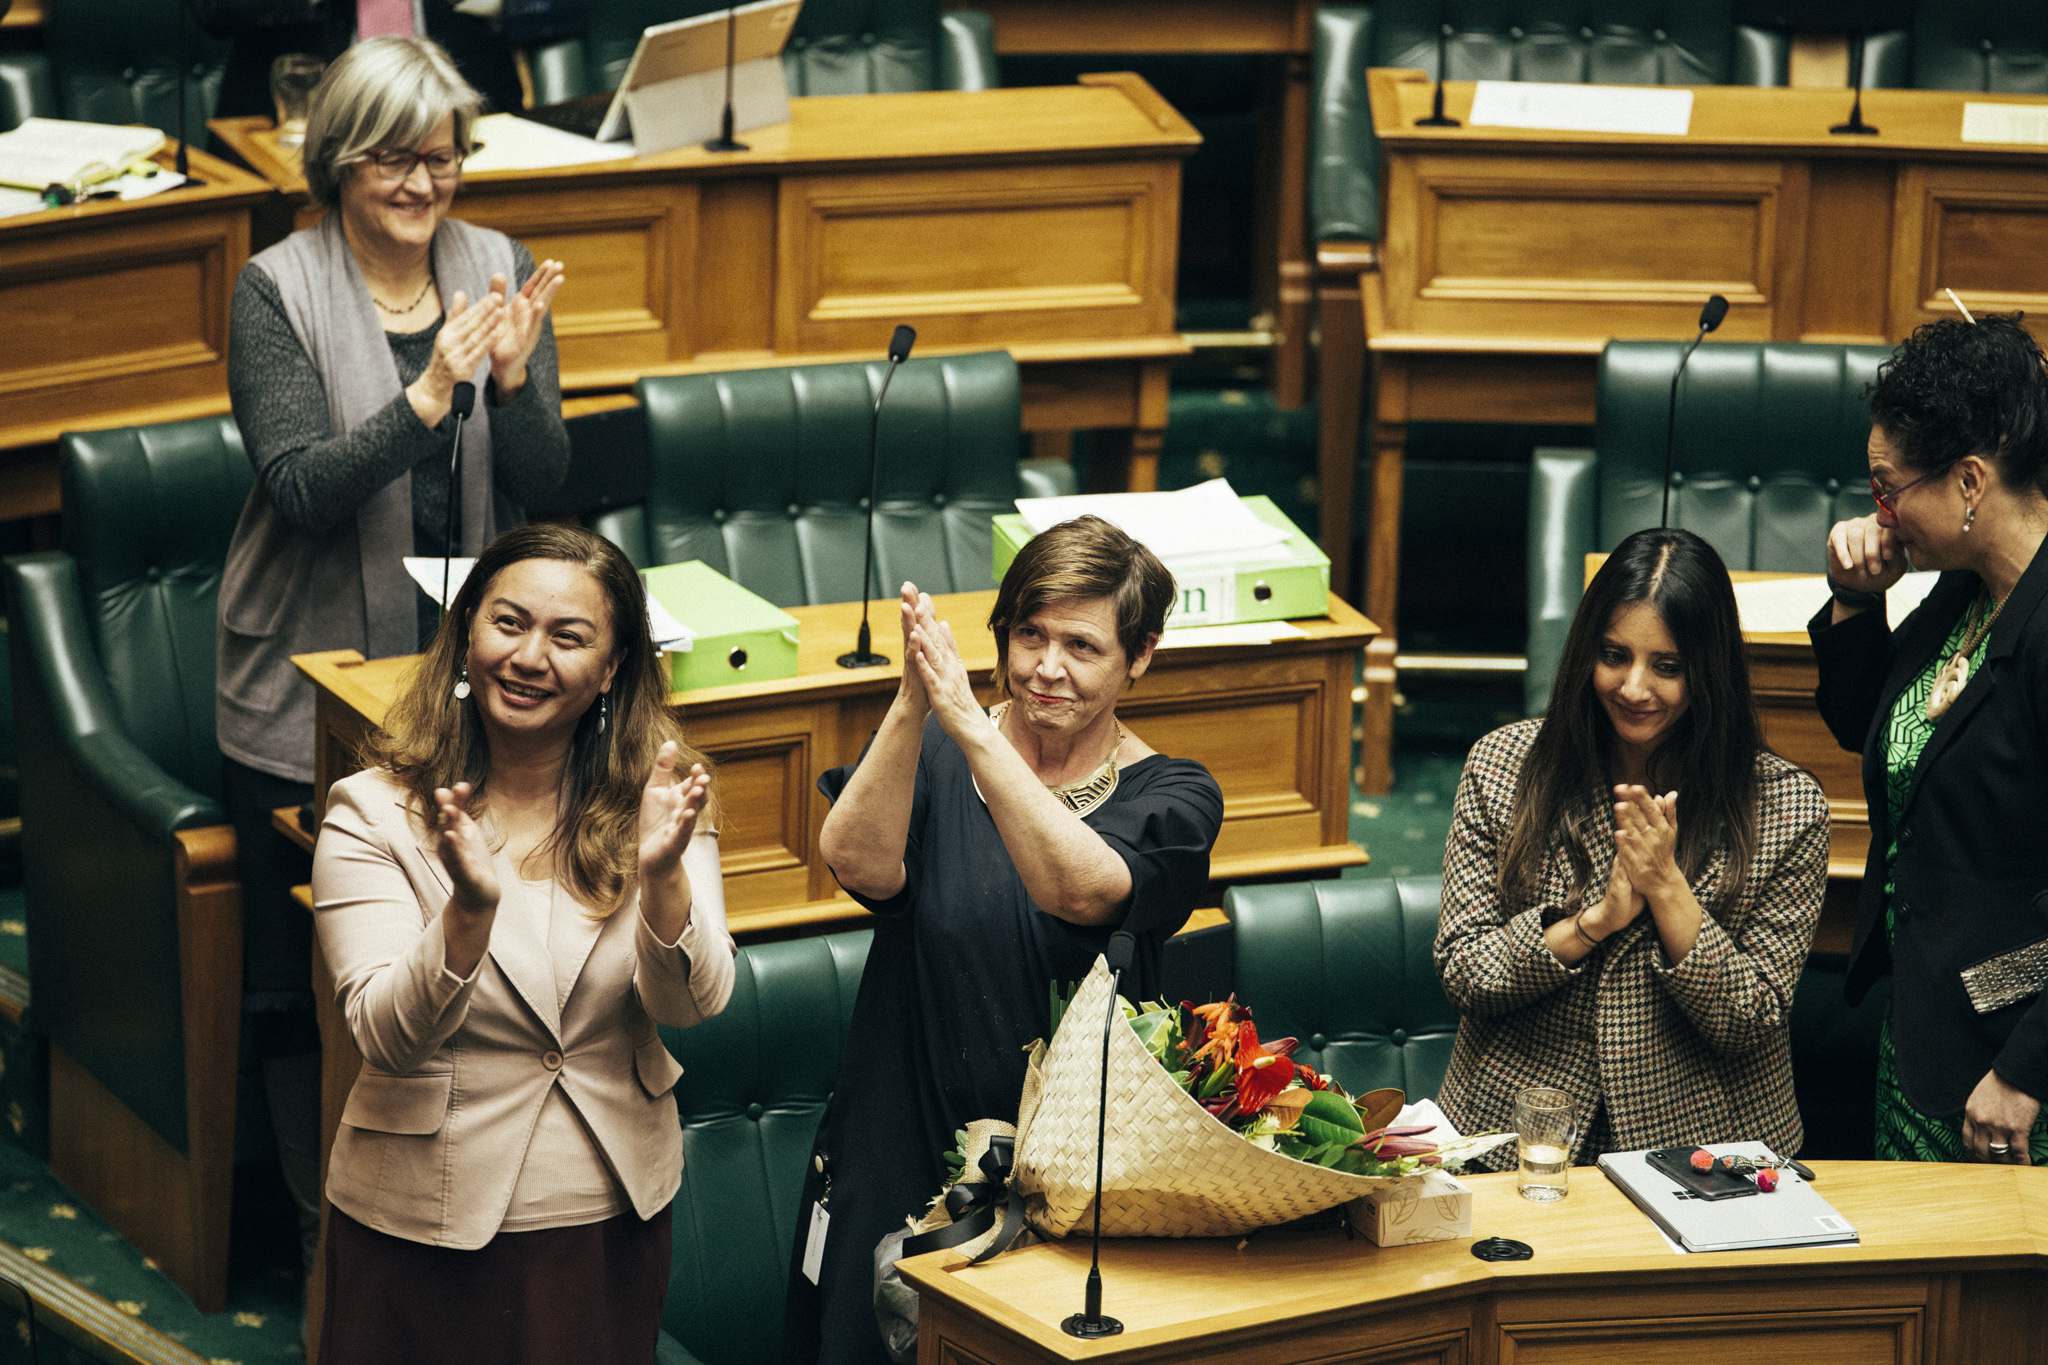 PHOTO: Marama Davidson, Jan Logie, and Golriz Ghahraman, members of the New Zealand House of Representatives, applaud after the passage of a bill to grant victims of domestic violence paid leave from work, in Wellington, New Zealand, July 25, 2018.